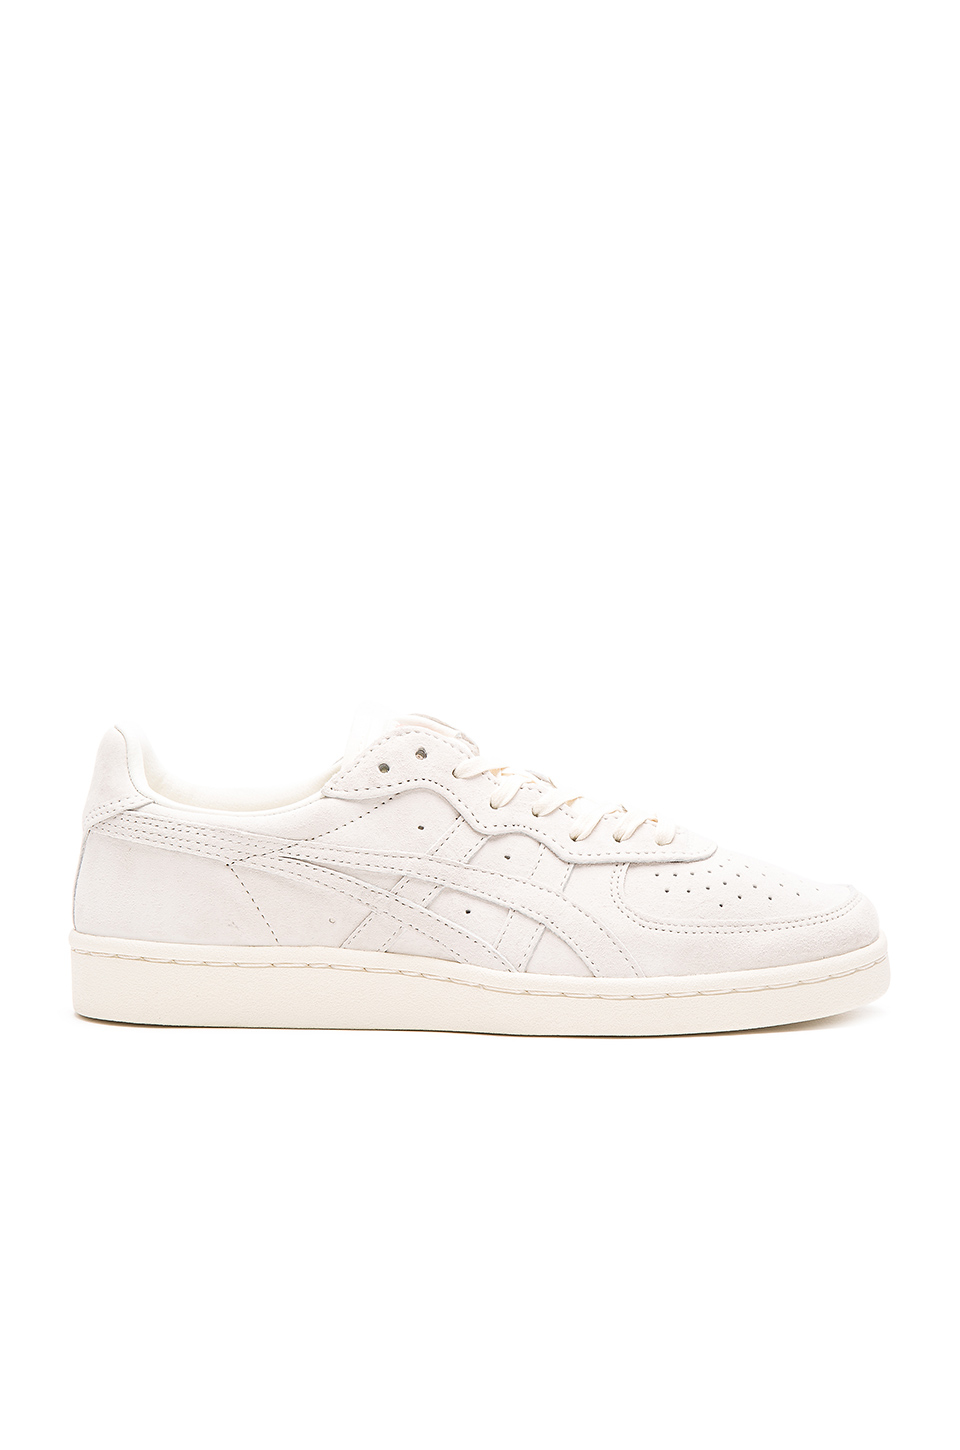 Onitsuka Tiger Suede Gsm in White for Men - Lyst